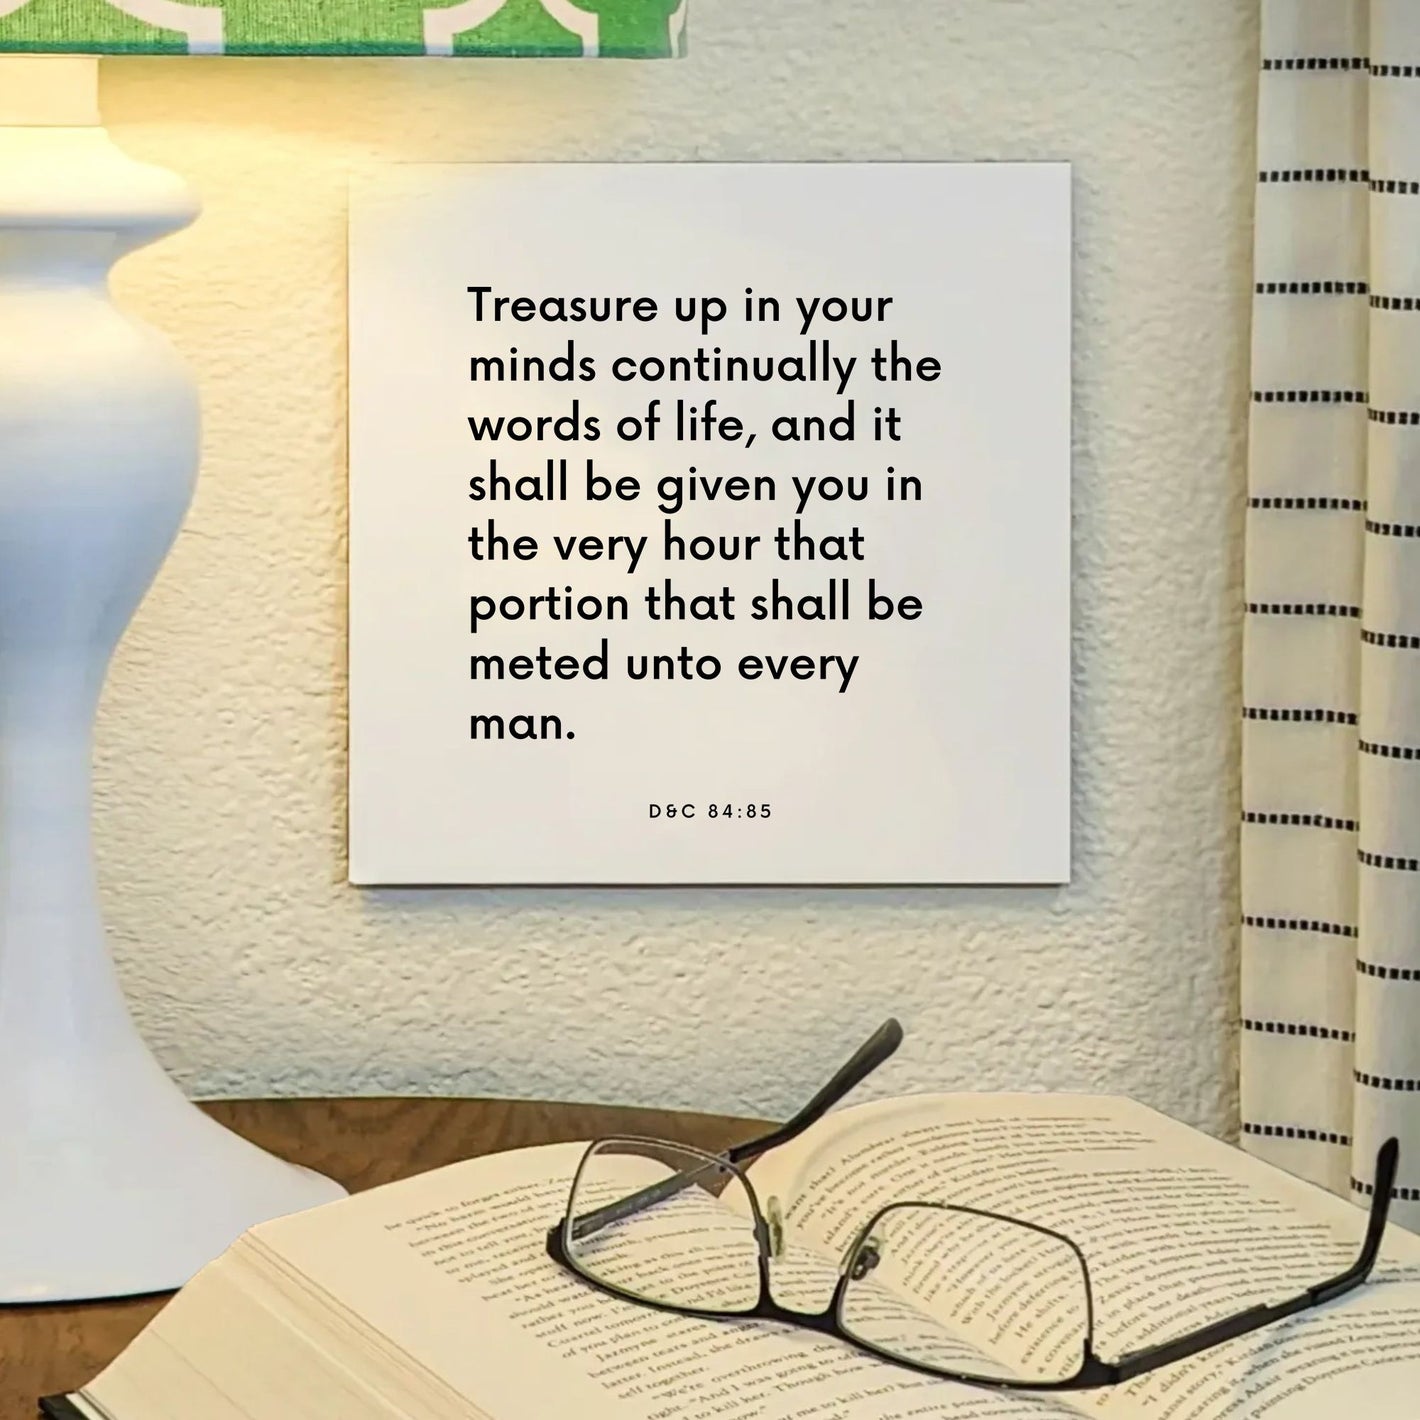 Lamp mouting of the scripture tile for D&C 84:85 - "Treasure up in your minds continually the words of life"